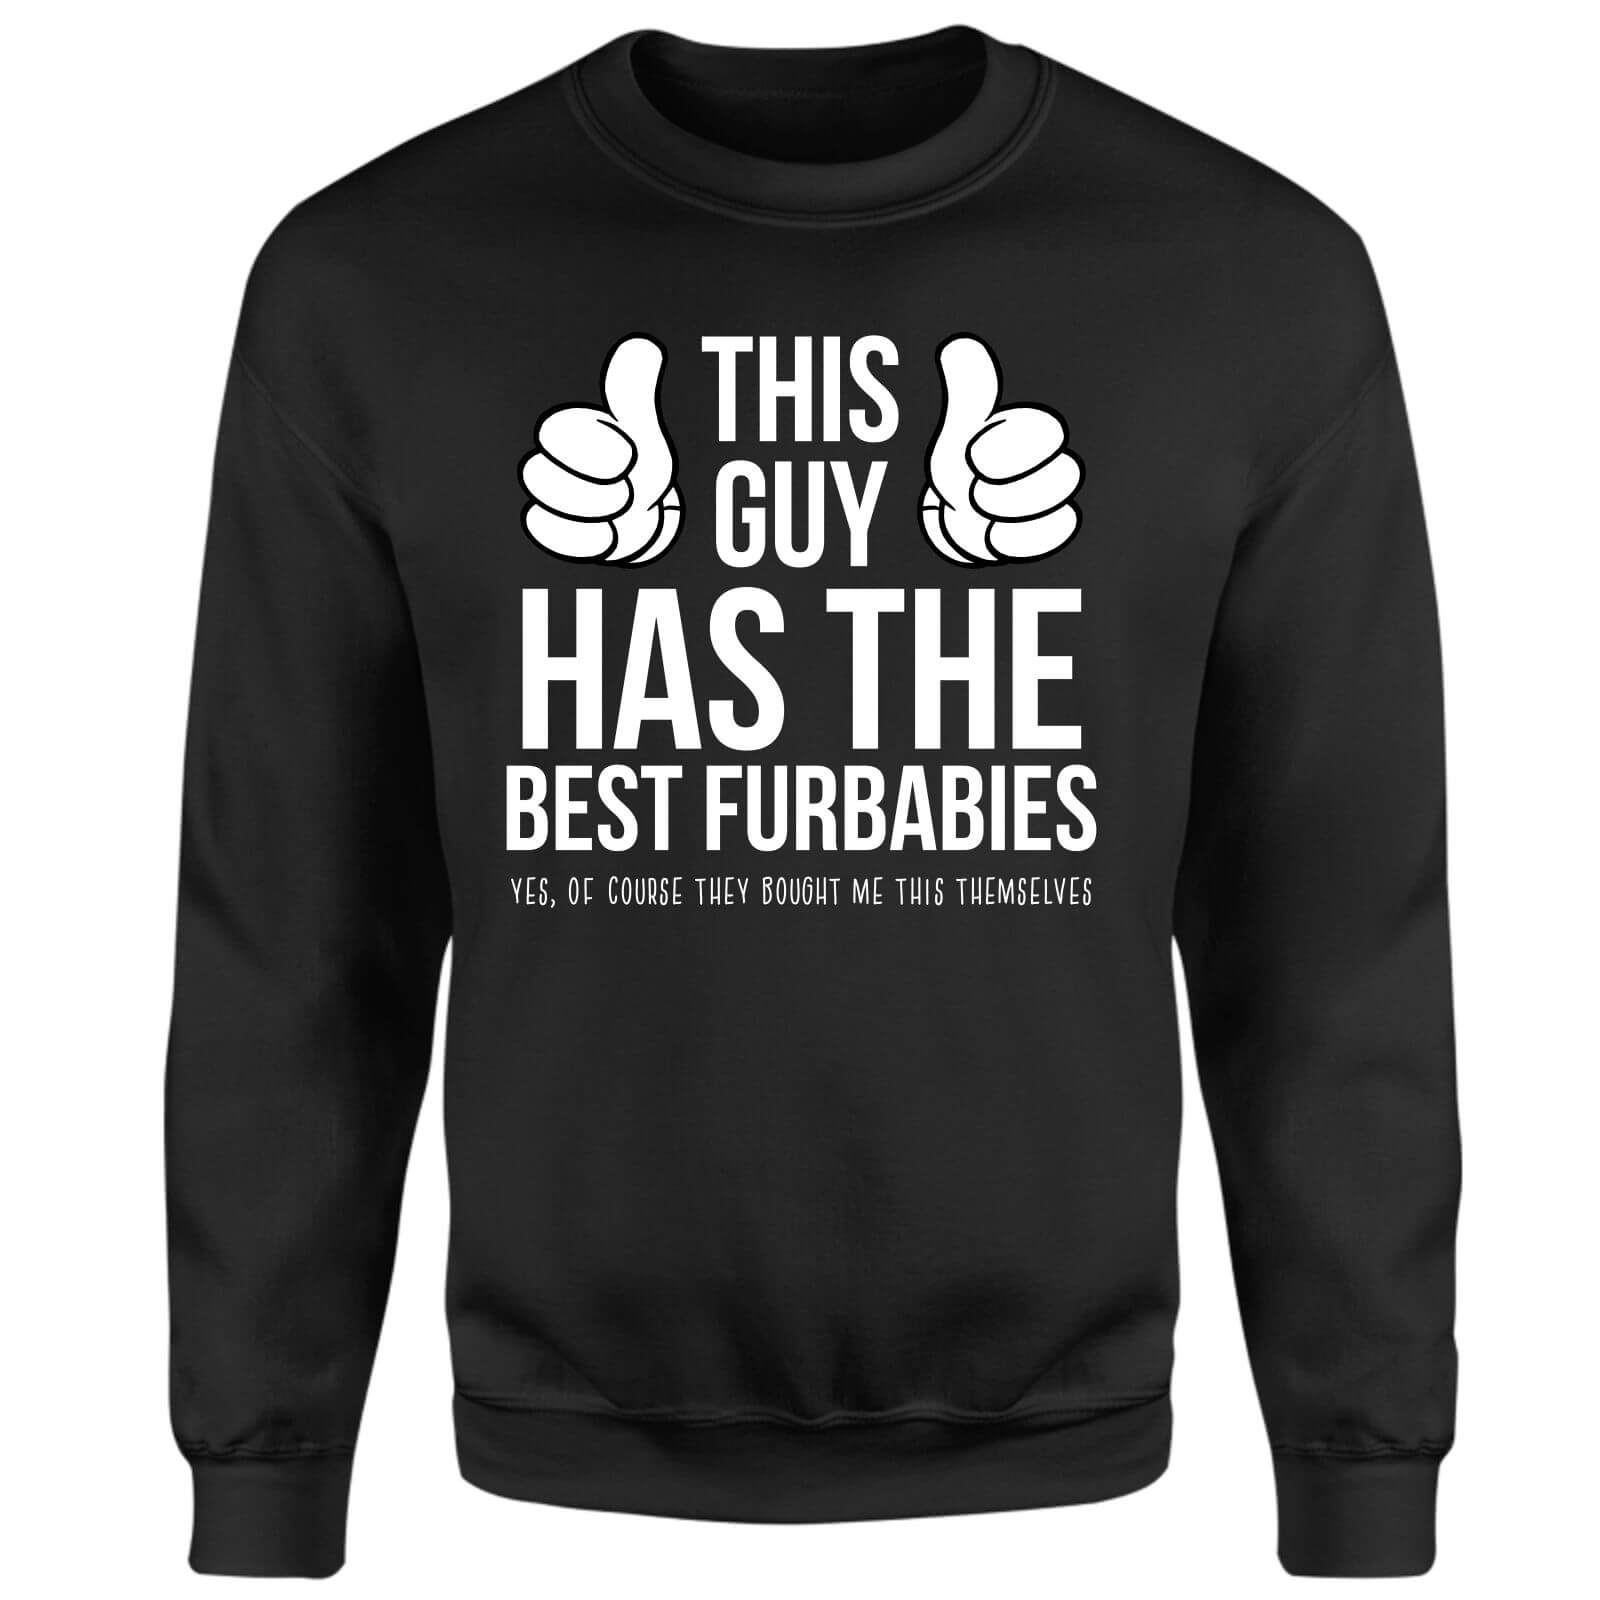 This Guy Has The Best Furbabies Yes They Brought Me This Sweatshirt - Black - Xs